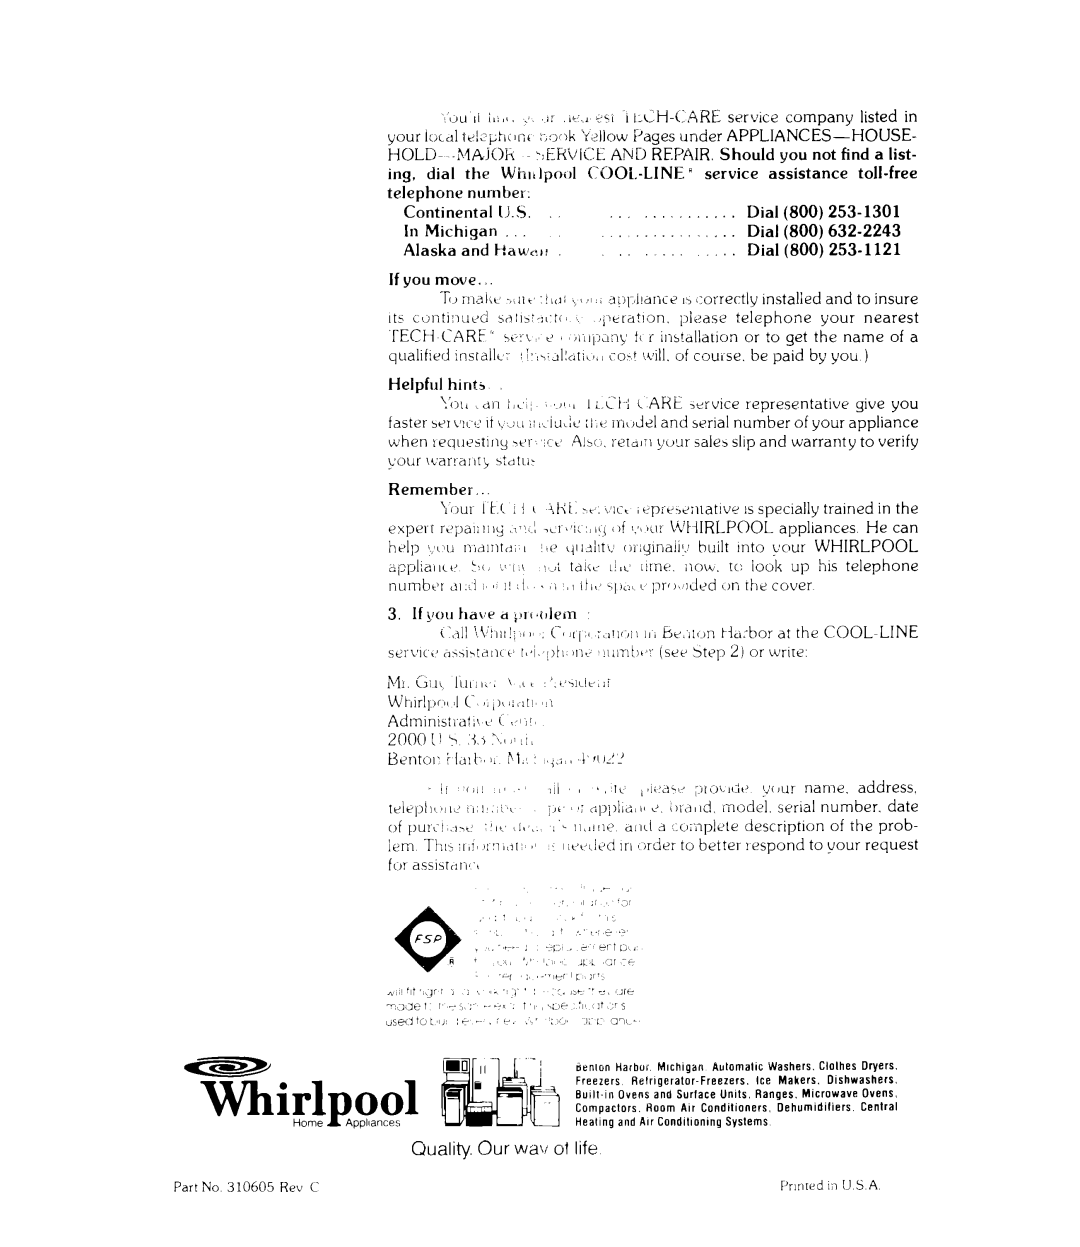 Whirlpool RJE-3700 Continental IJ.S, In Michigan, Alaska and t!aw ?l, If you move, Helpful hints, Remember, Dial, rlpool 